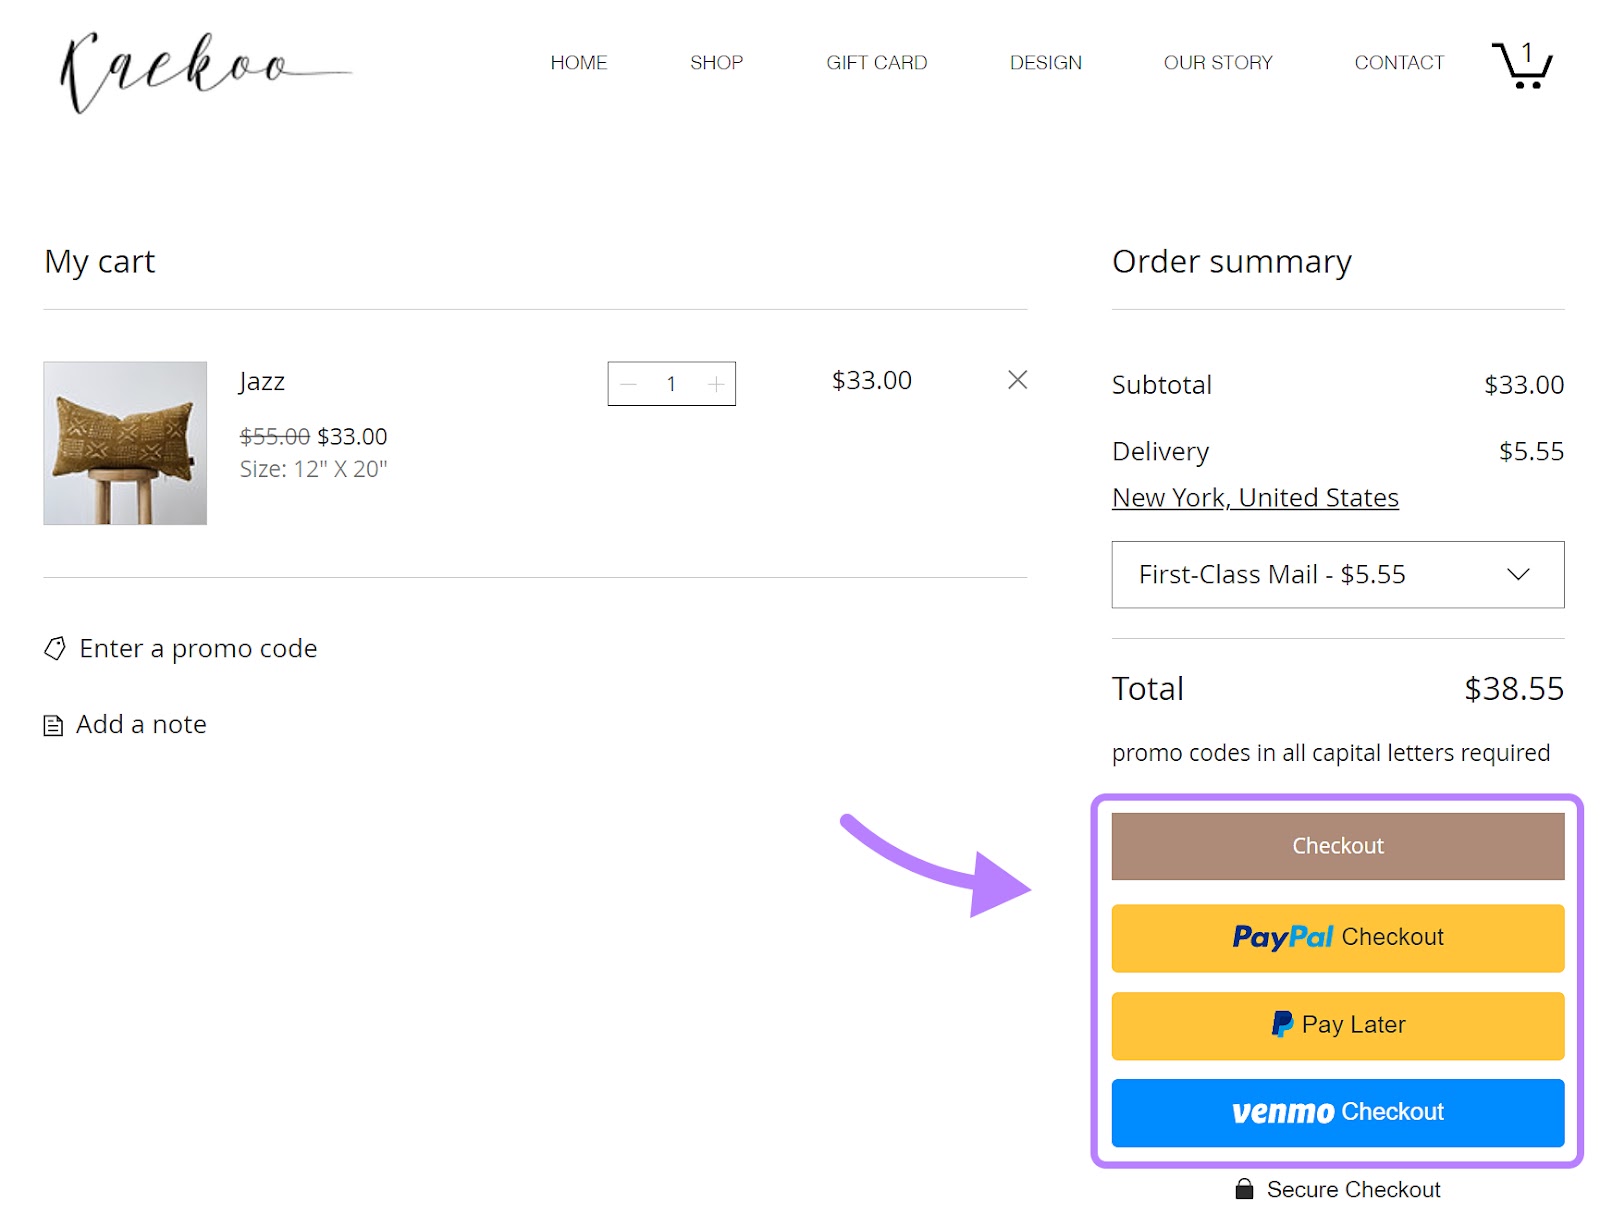 Wix eCommerce payment gateways, including checkout, paypal checkout, pay later, and venmo checkout options